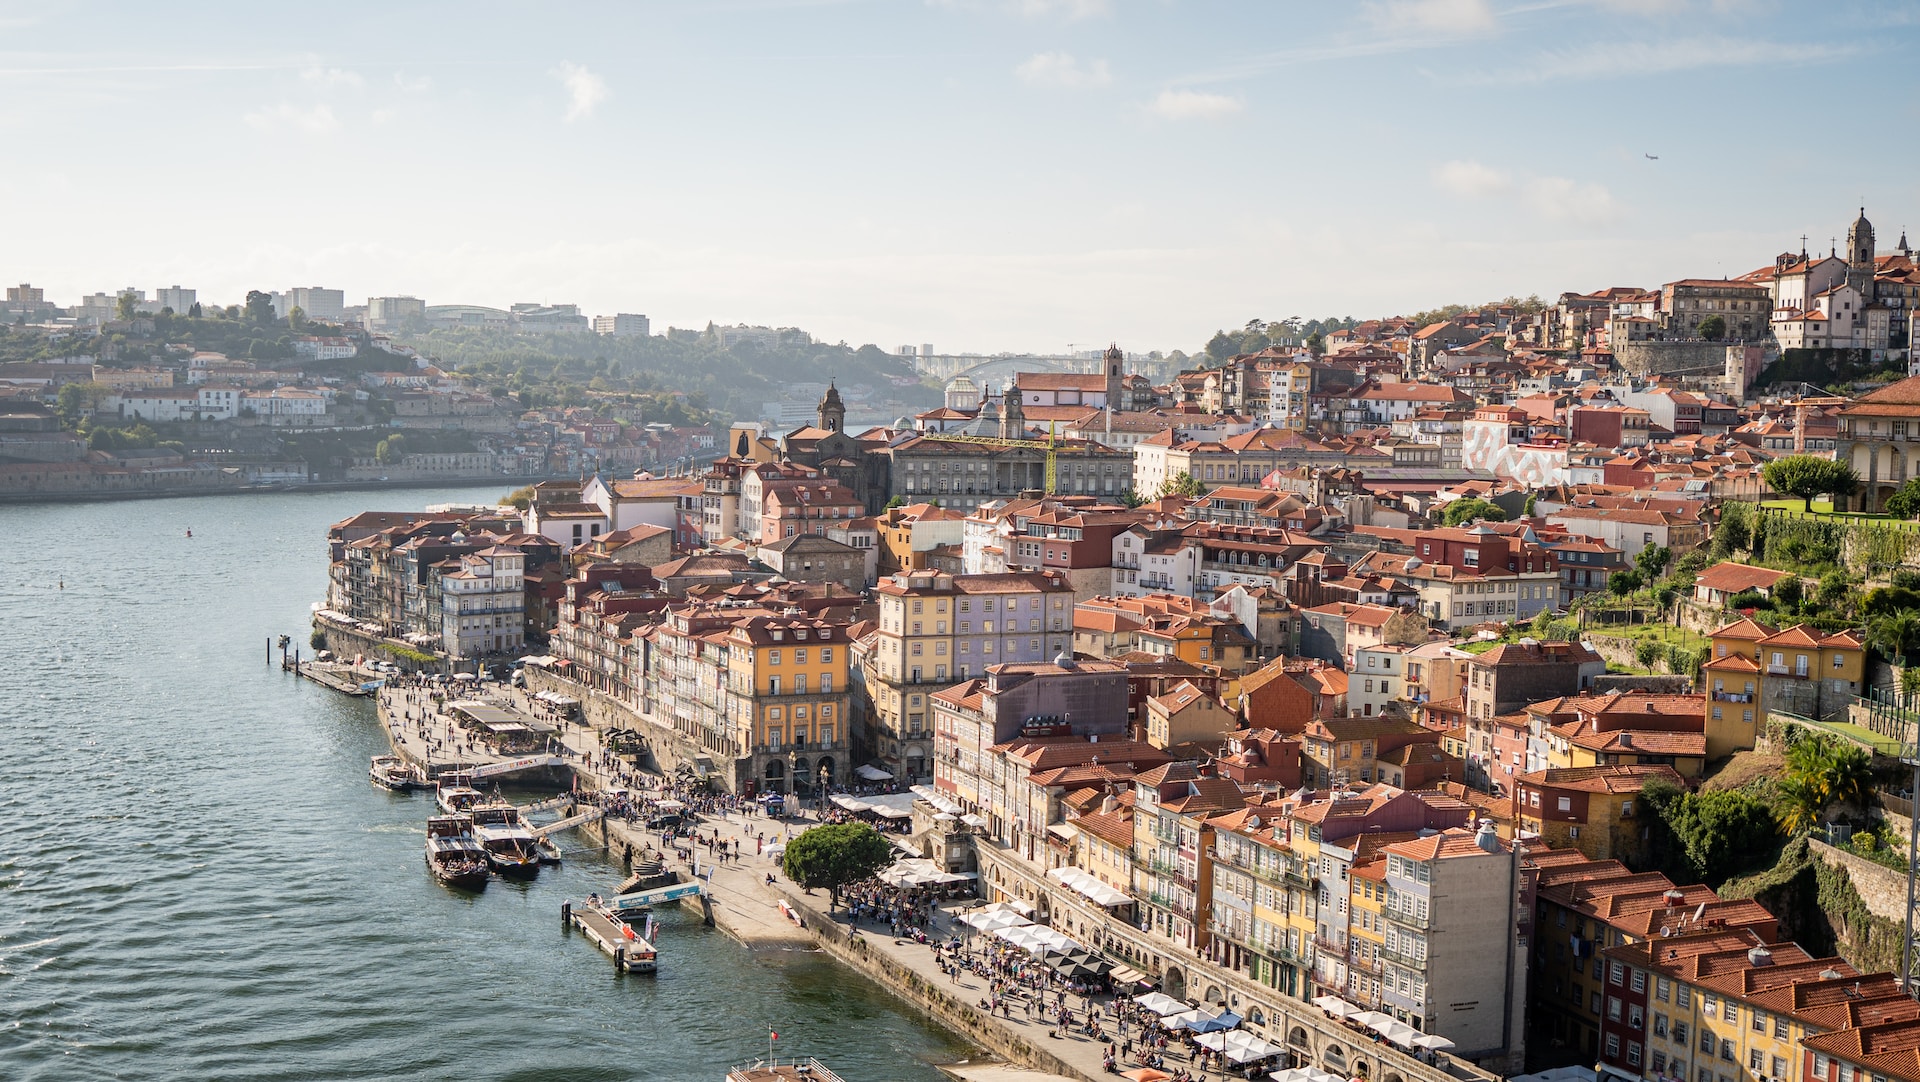 The New Jews of Porto: Rebuilding a Jewish Community from the Ashes of History